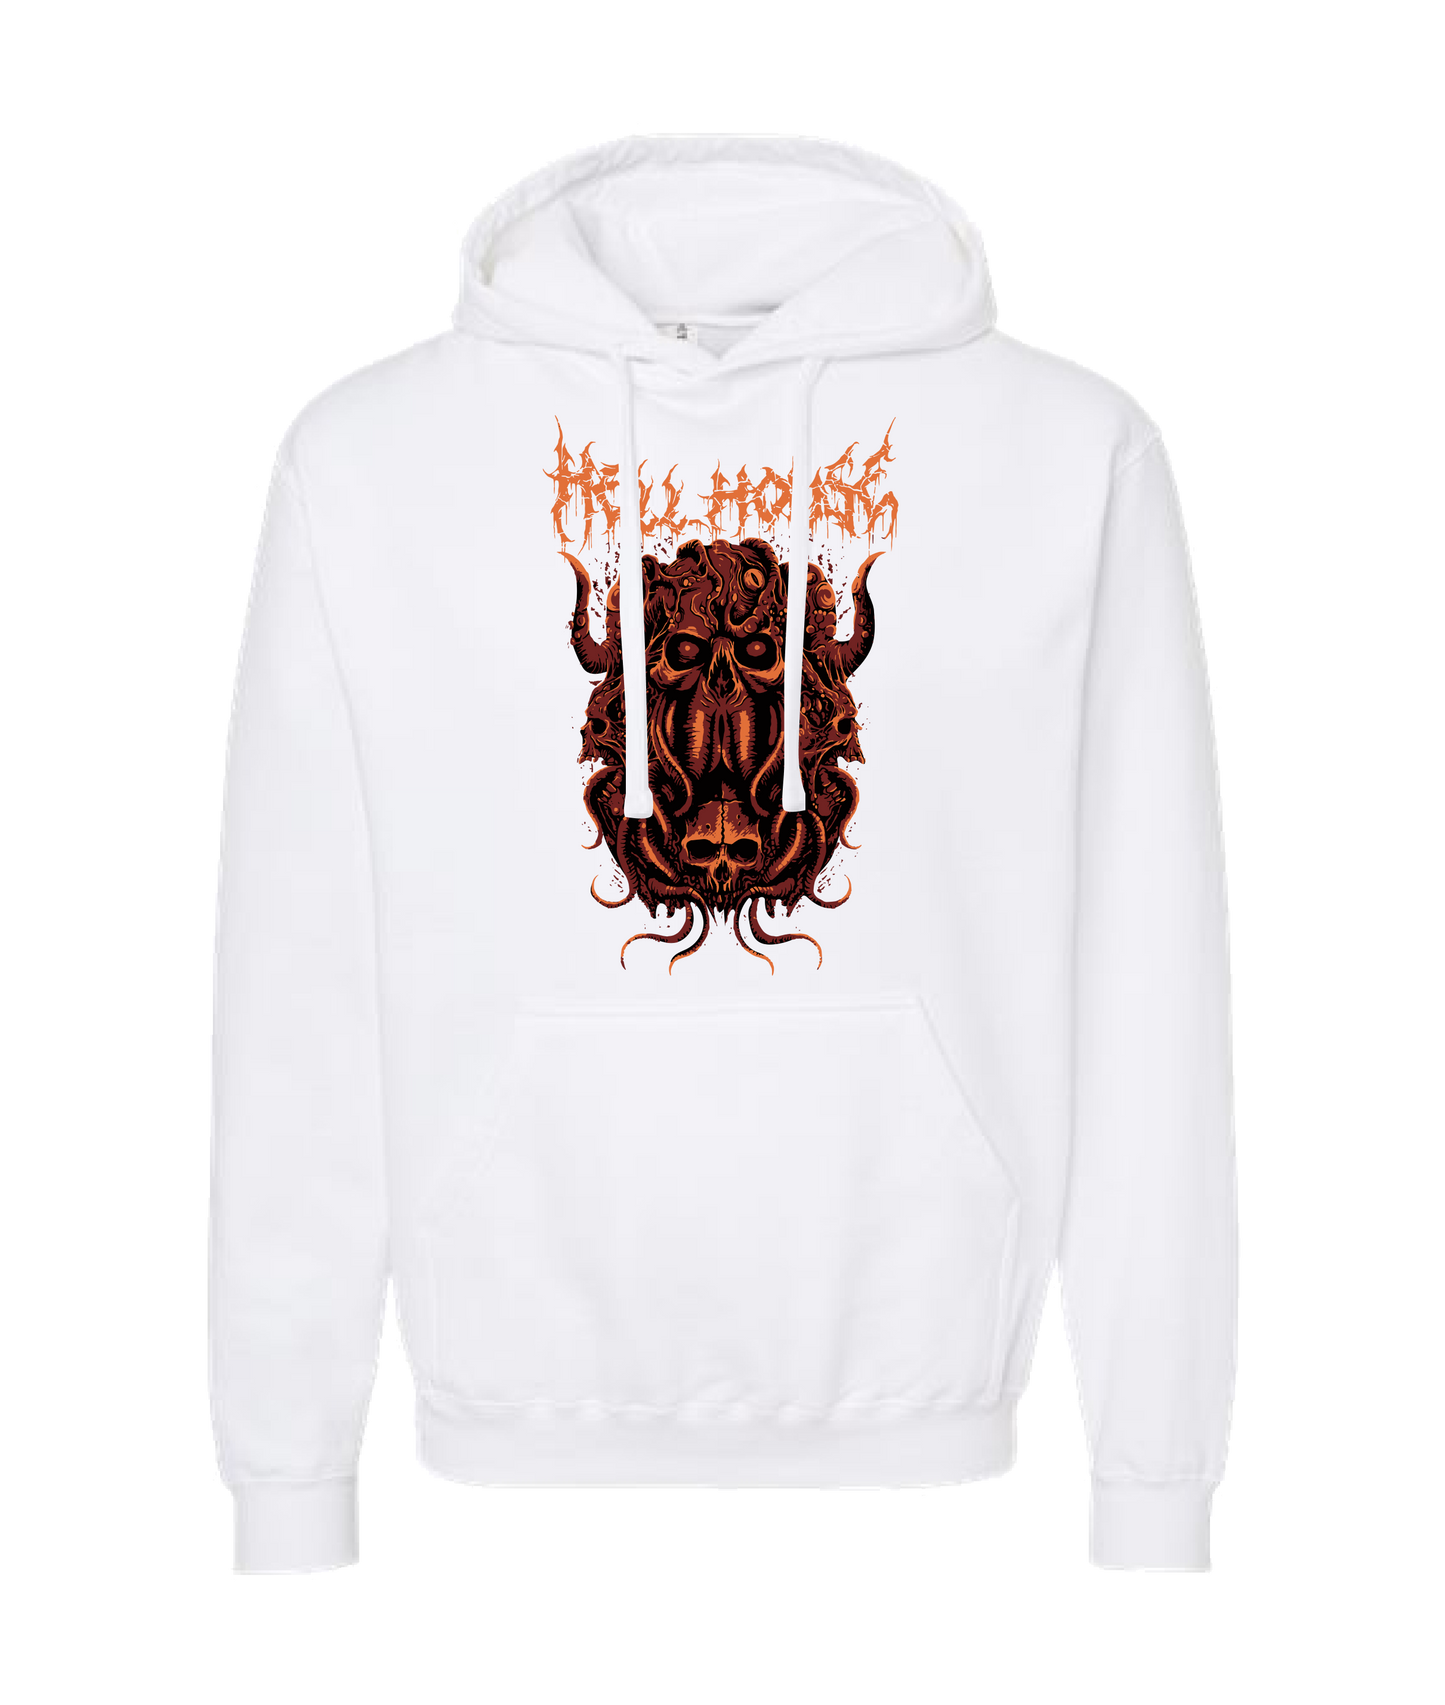 Hellhouse crypt - OCTOPUSSSKVLL - White Hoodie